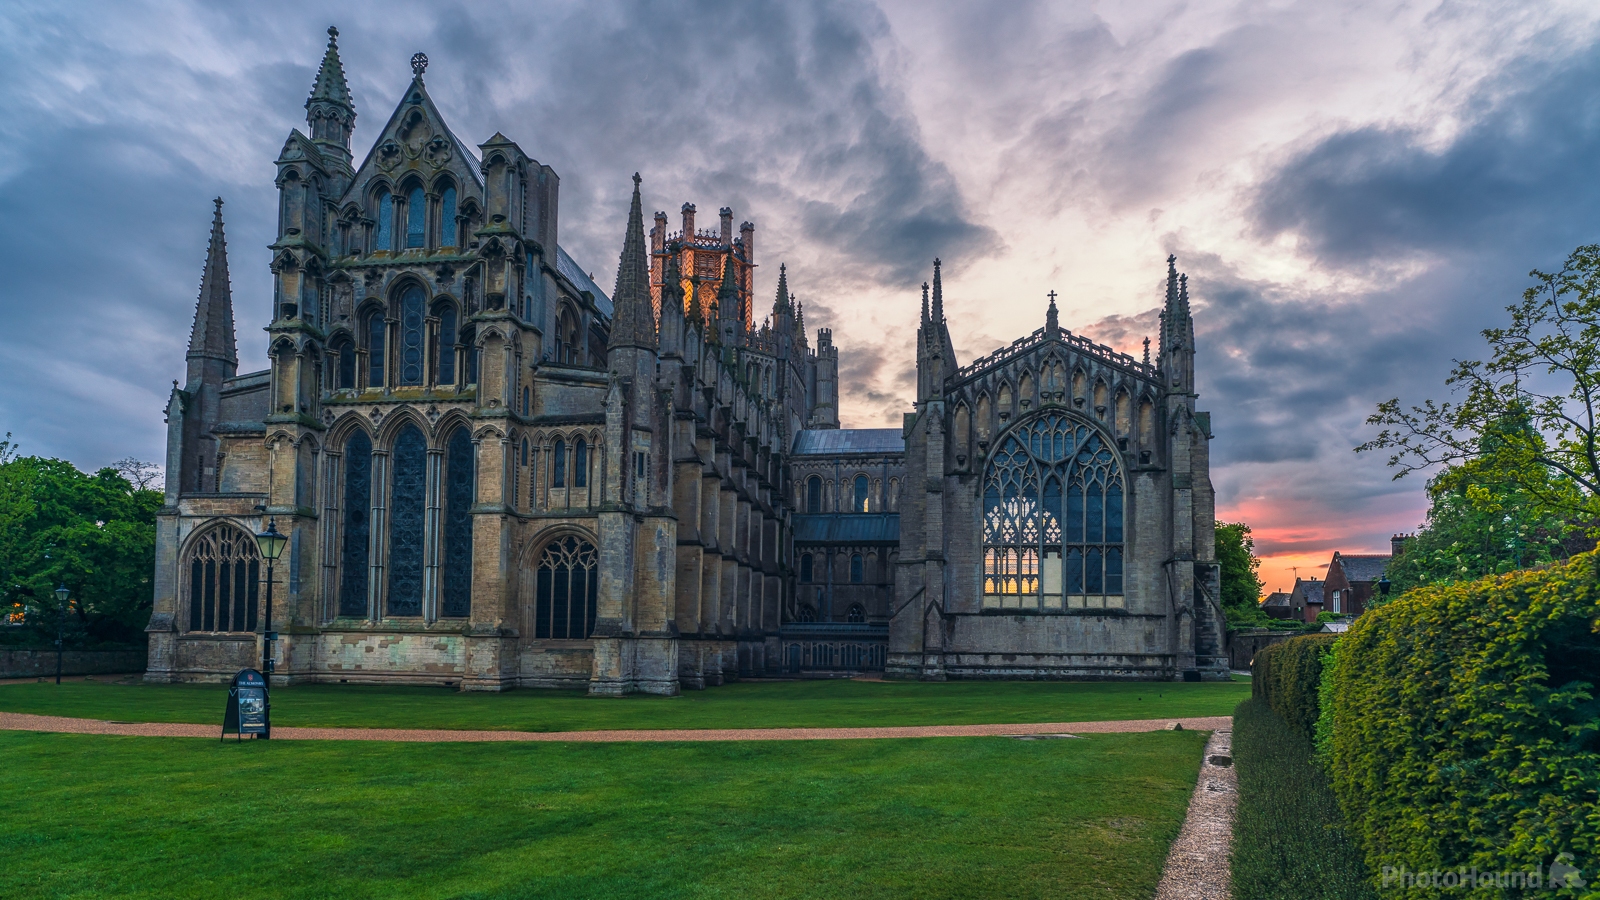 Image of Ely Cathedral - East Lawn by James Billings.